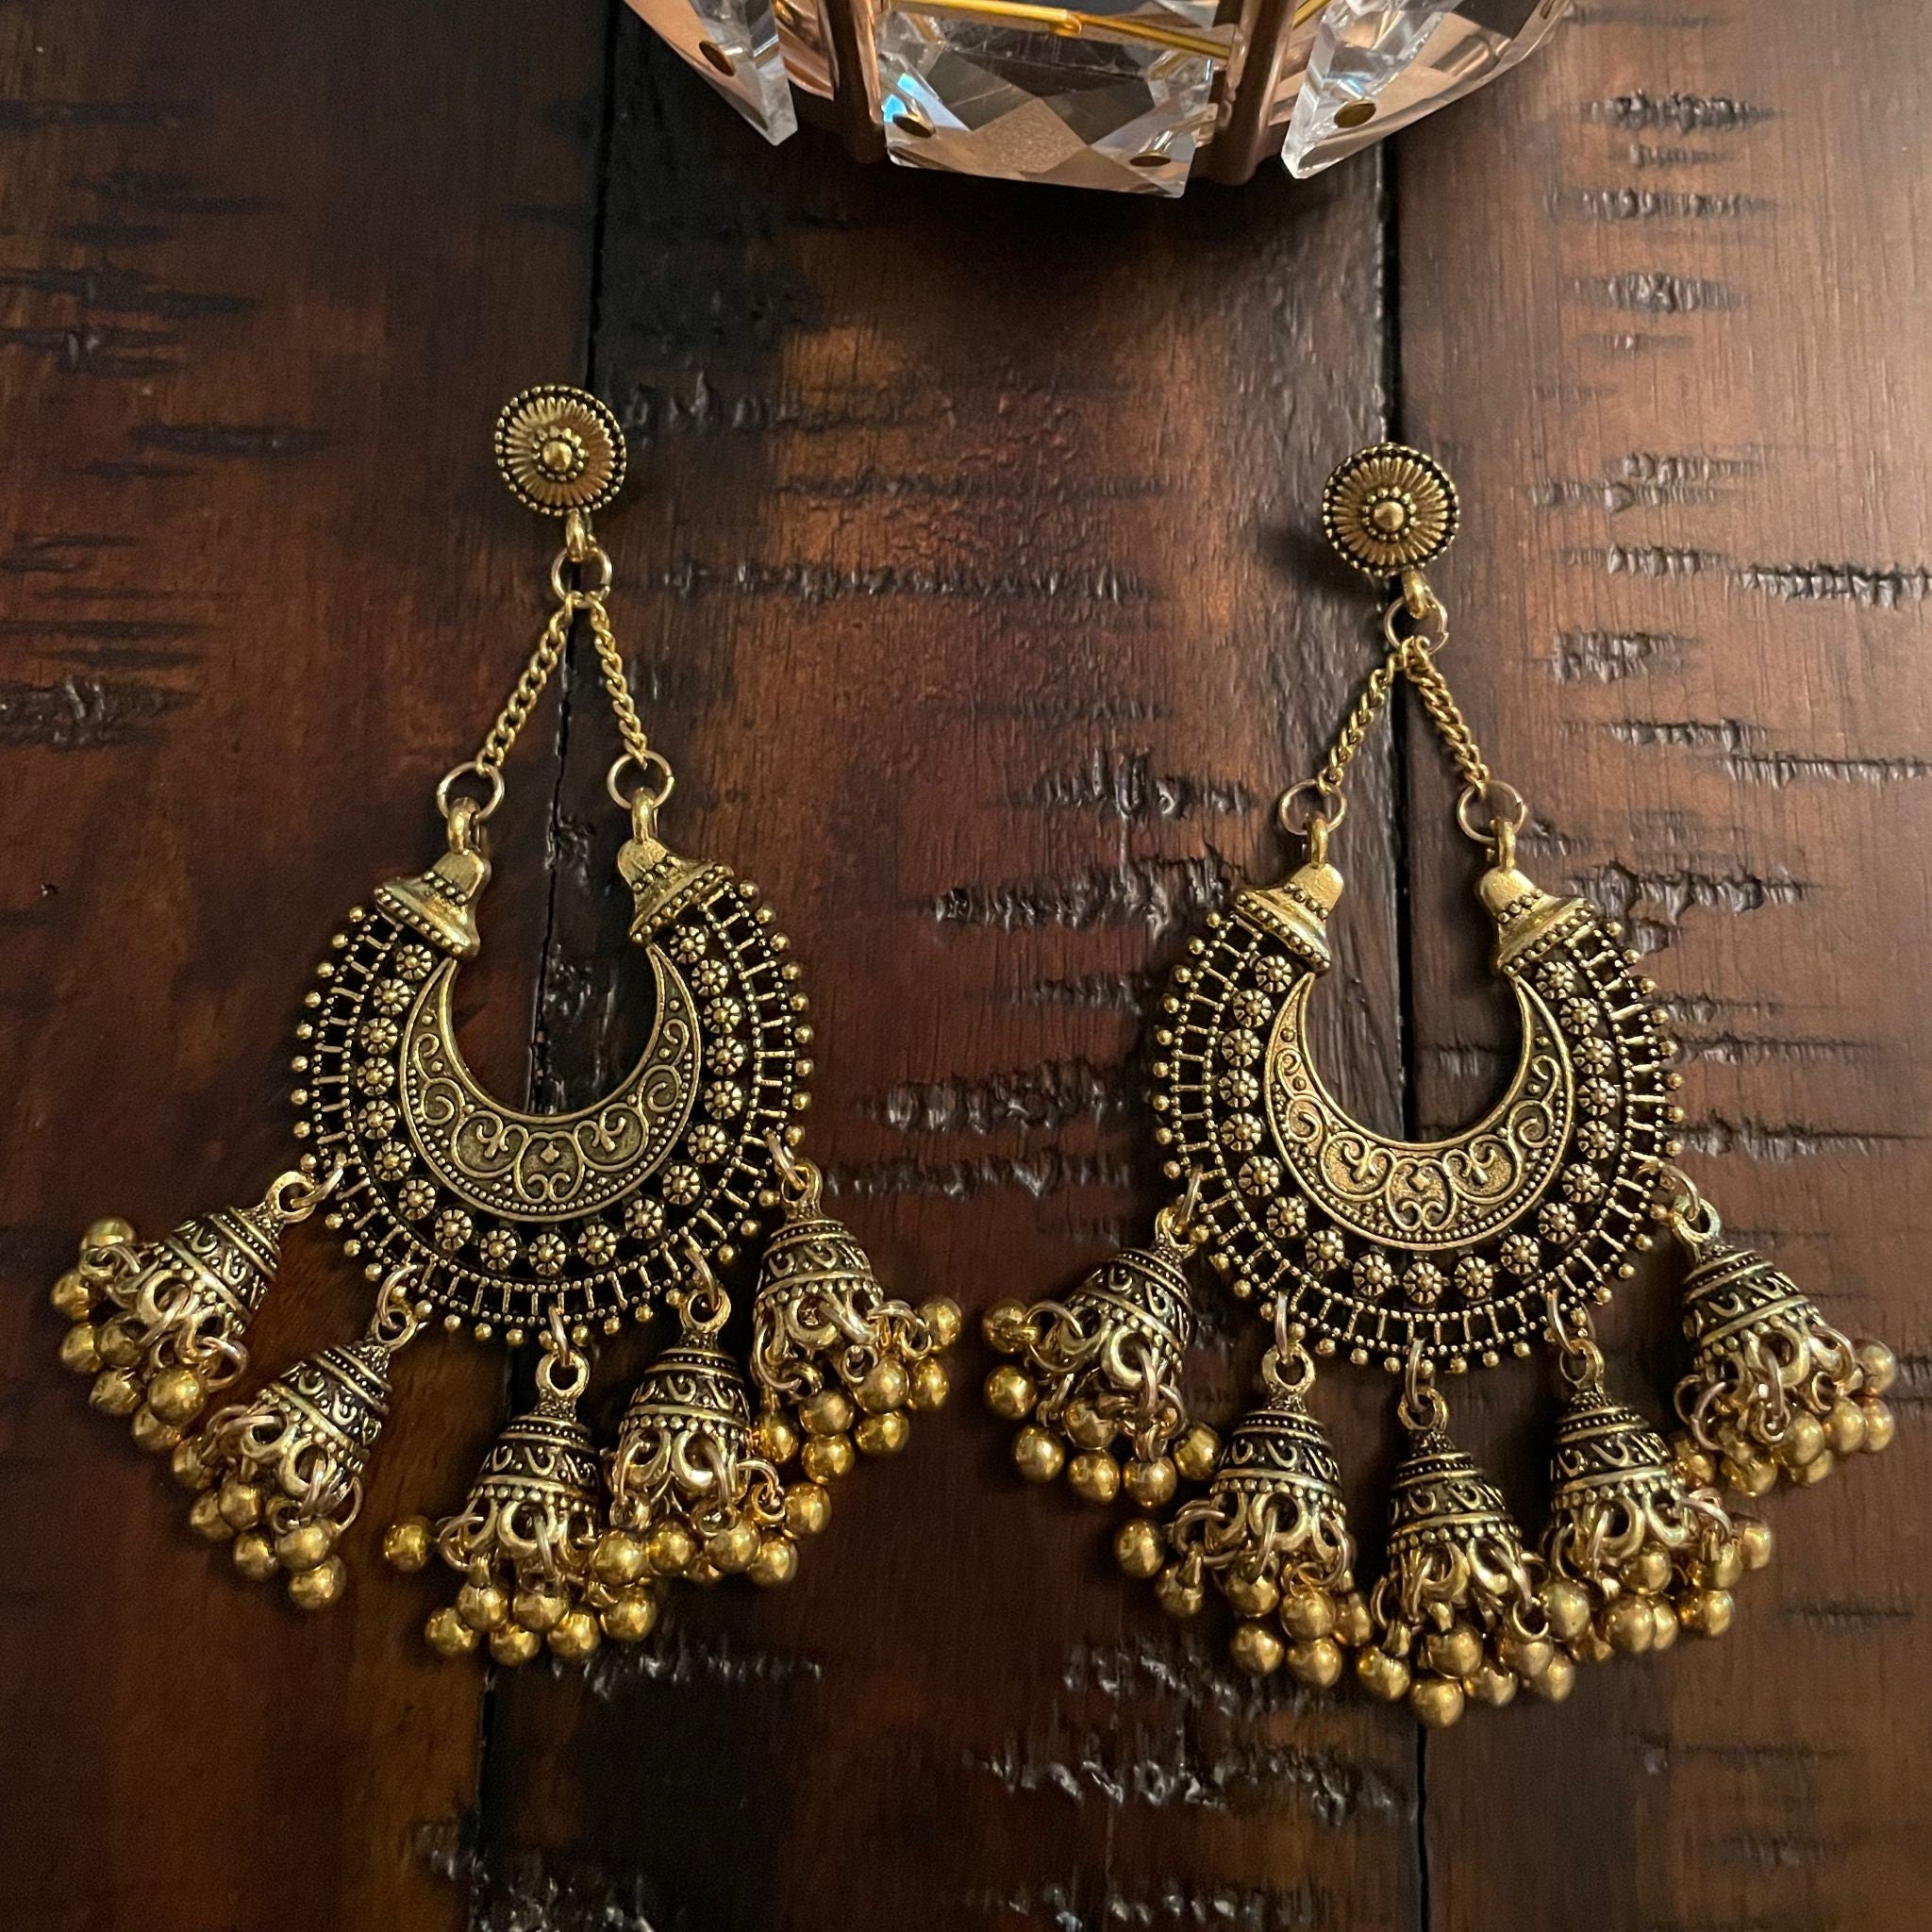 Temple Jewelry Indian Earrings Ear Cuff Earrings South | Etsy India |  Traditional jewelry, Indian jewelry sets, Indian jewelry earrings